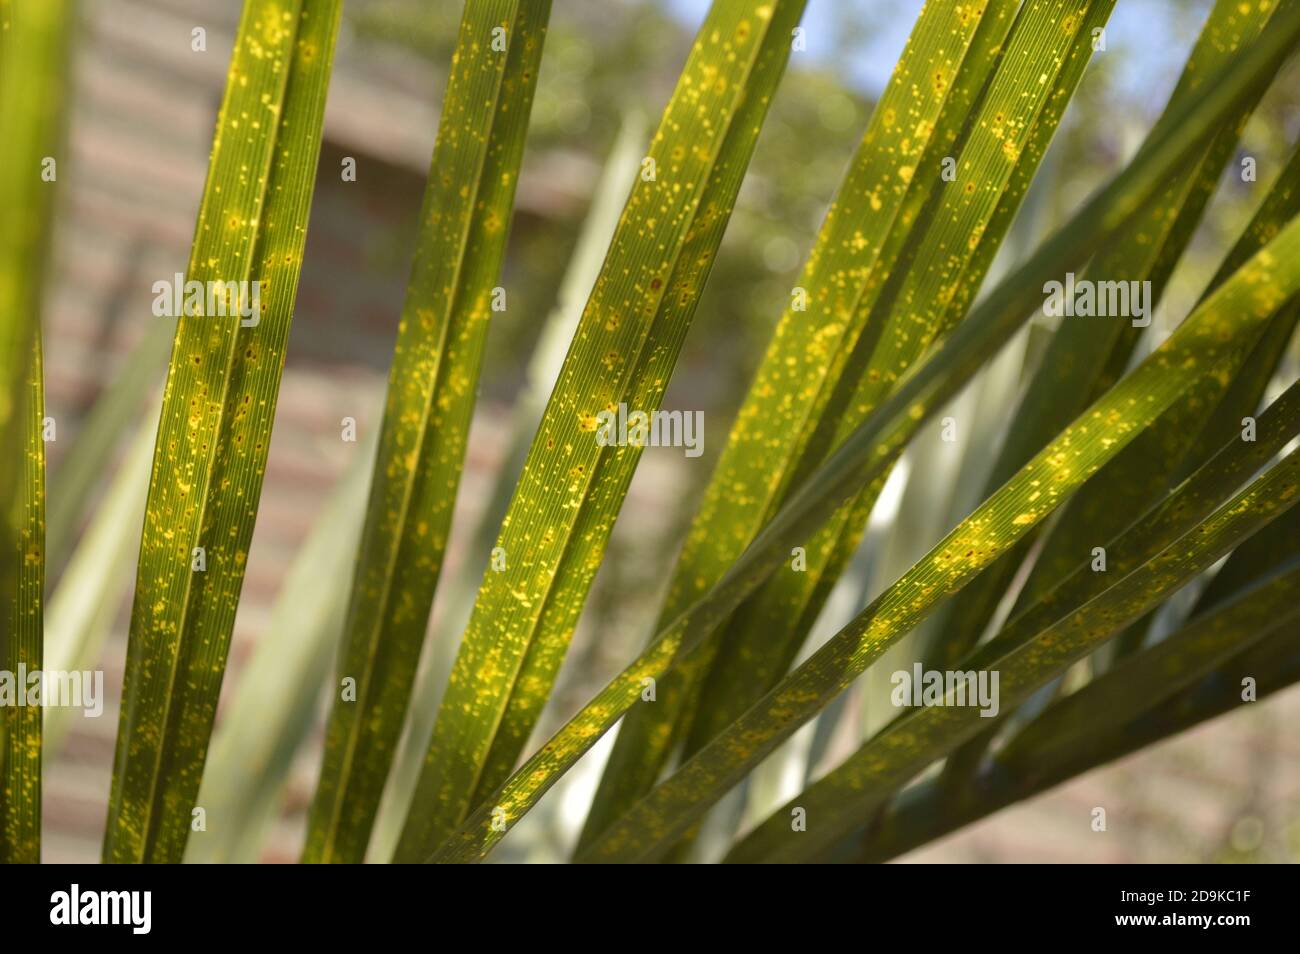 Adaxial view of thin green palm leaves with yellow spots Stock Photo